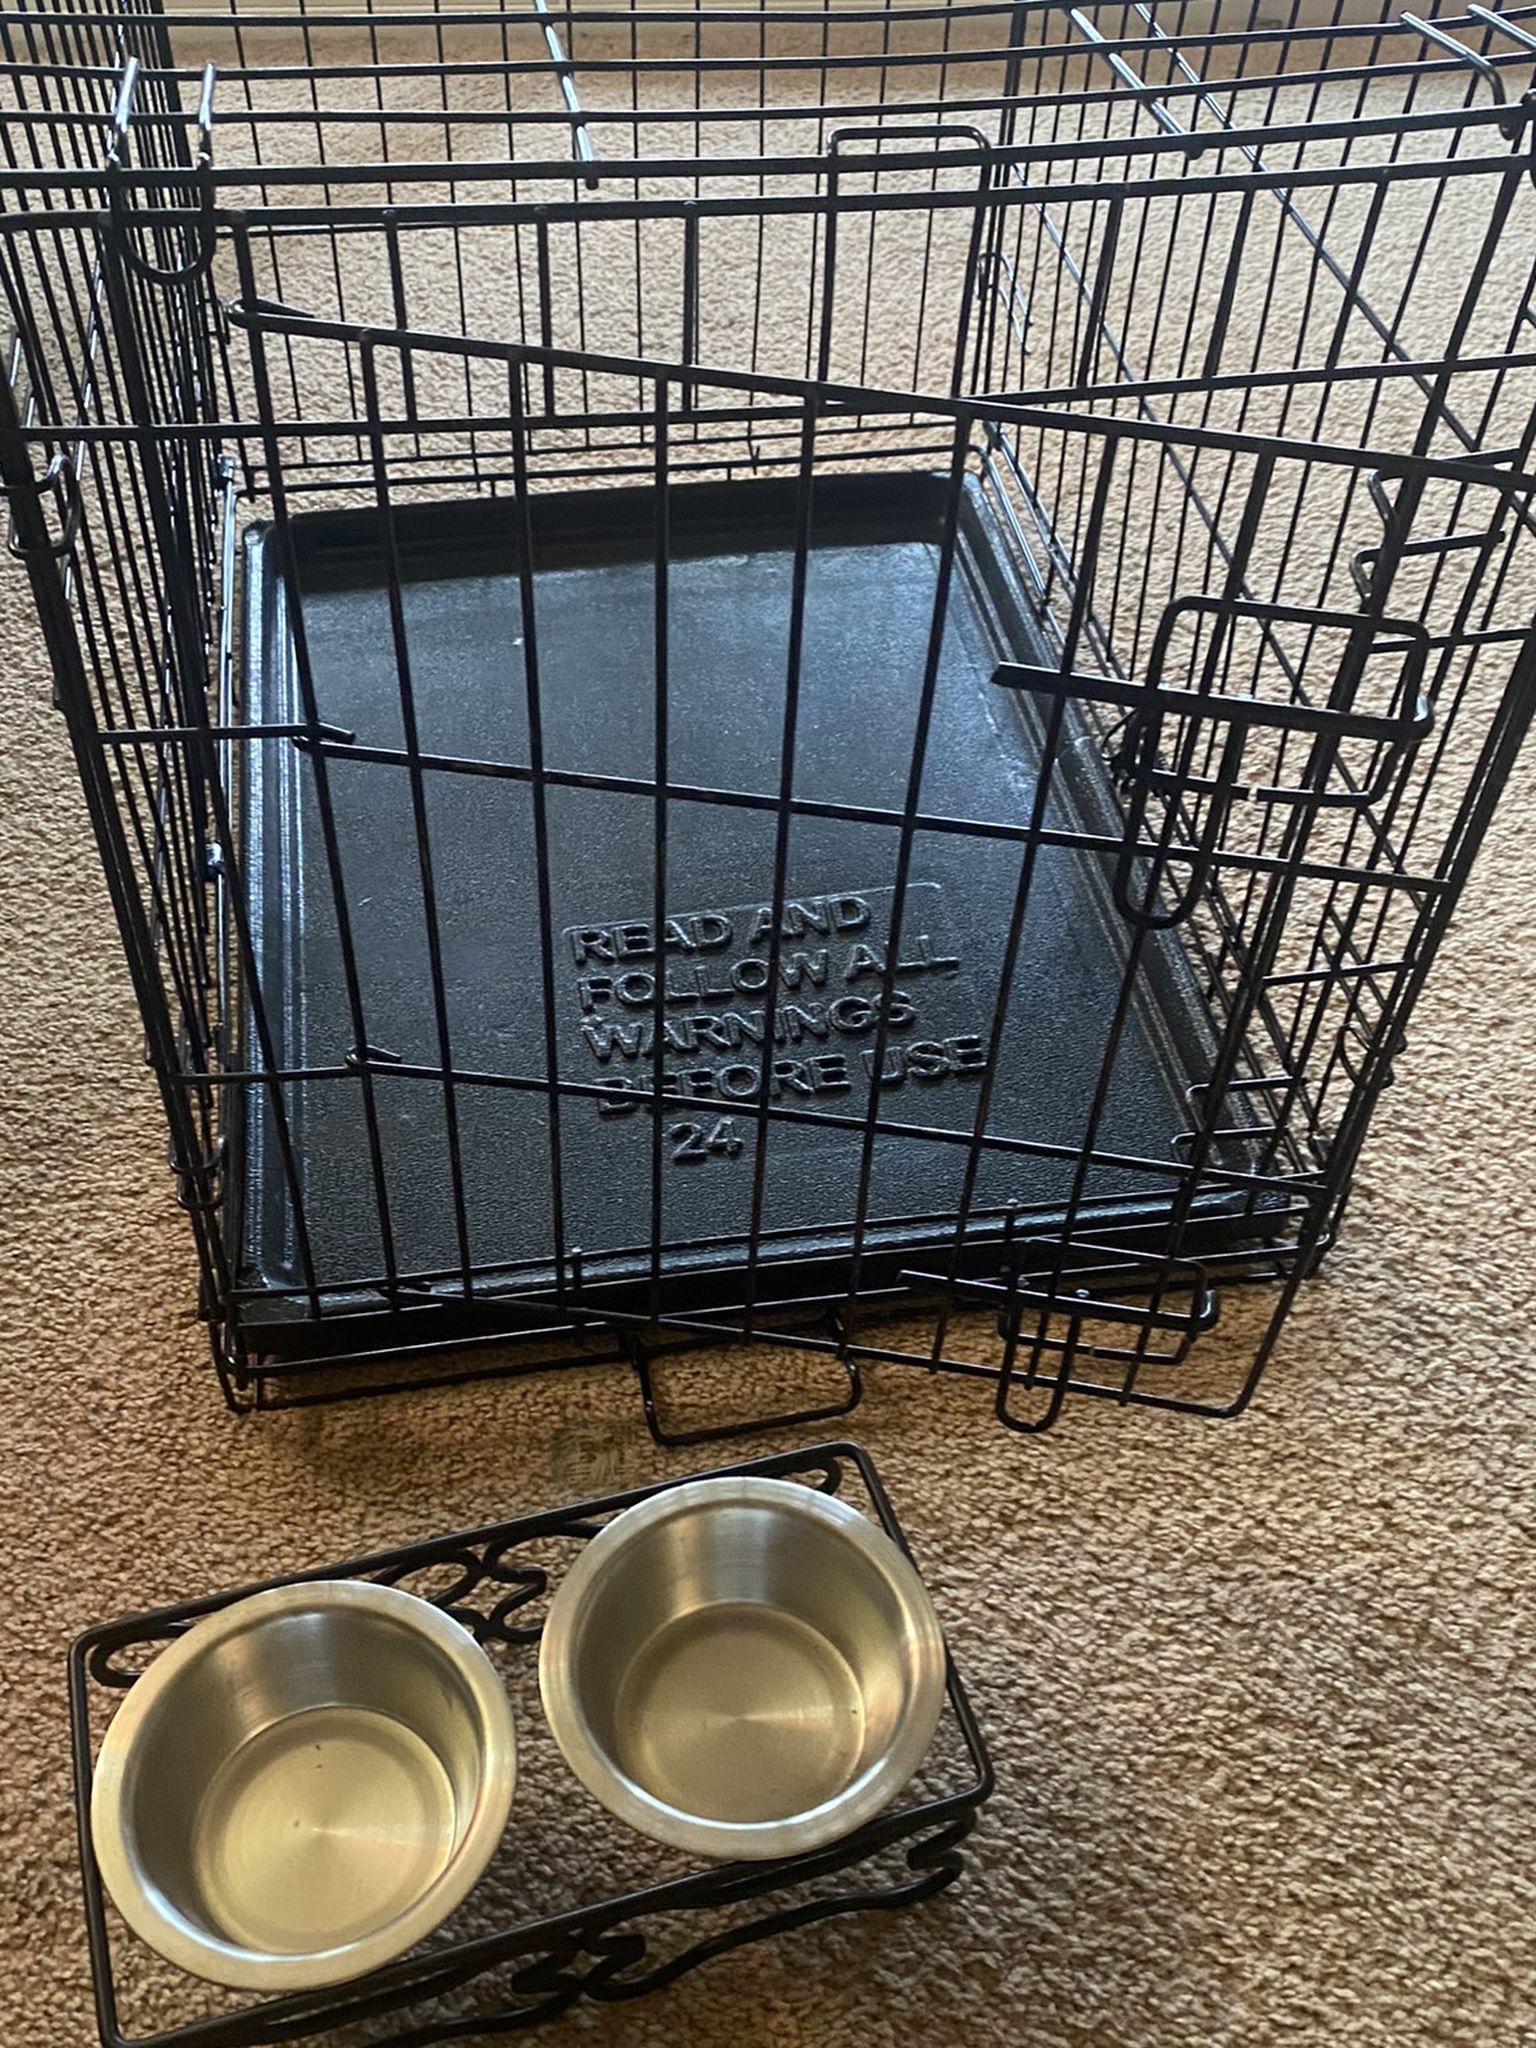 Puppy Starter Kit (crate, bowls, bed) 